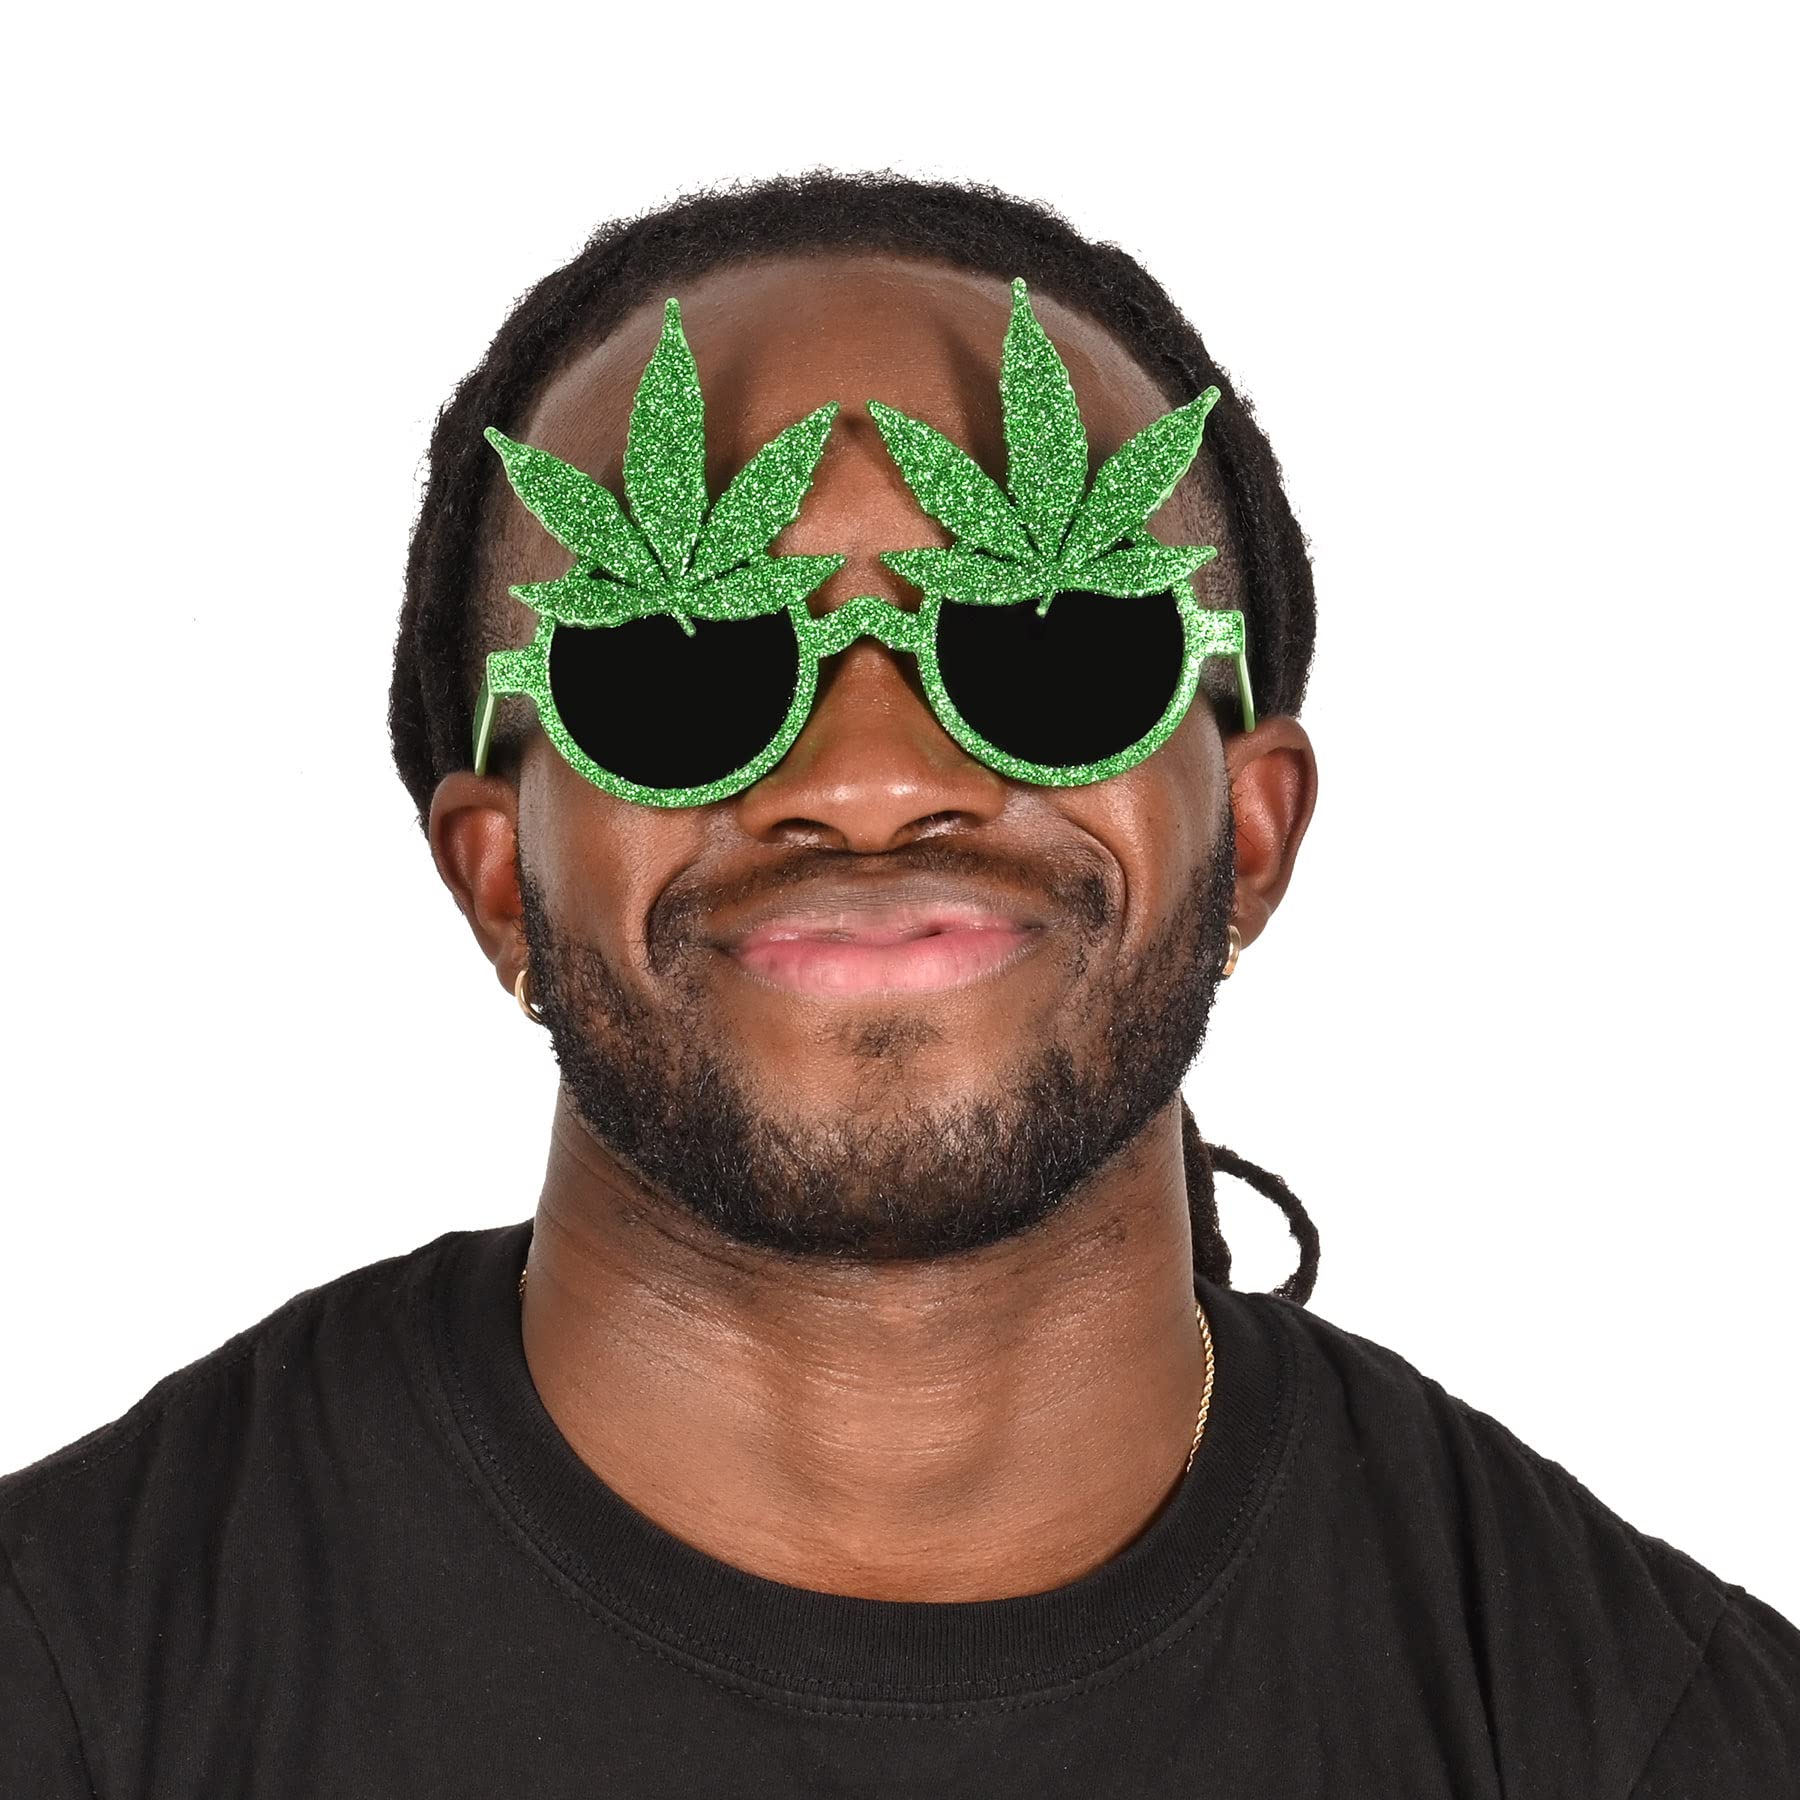 Beistle , 3 Piece Glittered Weed Glasses, Green